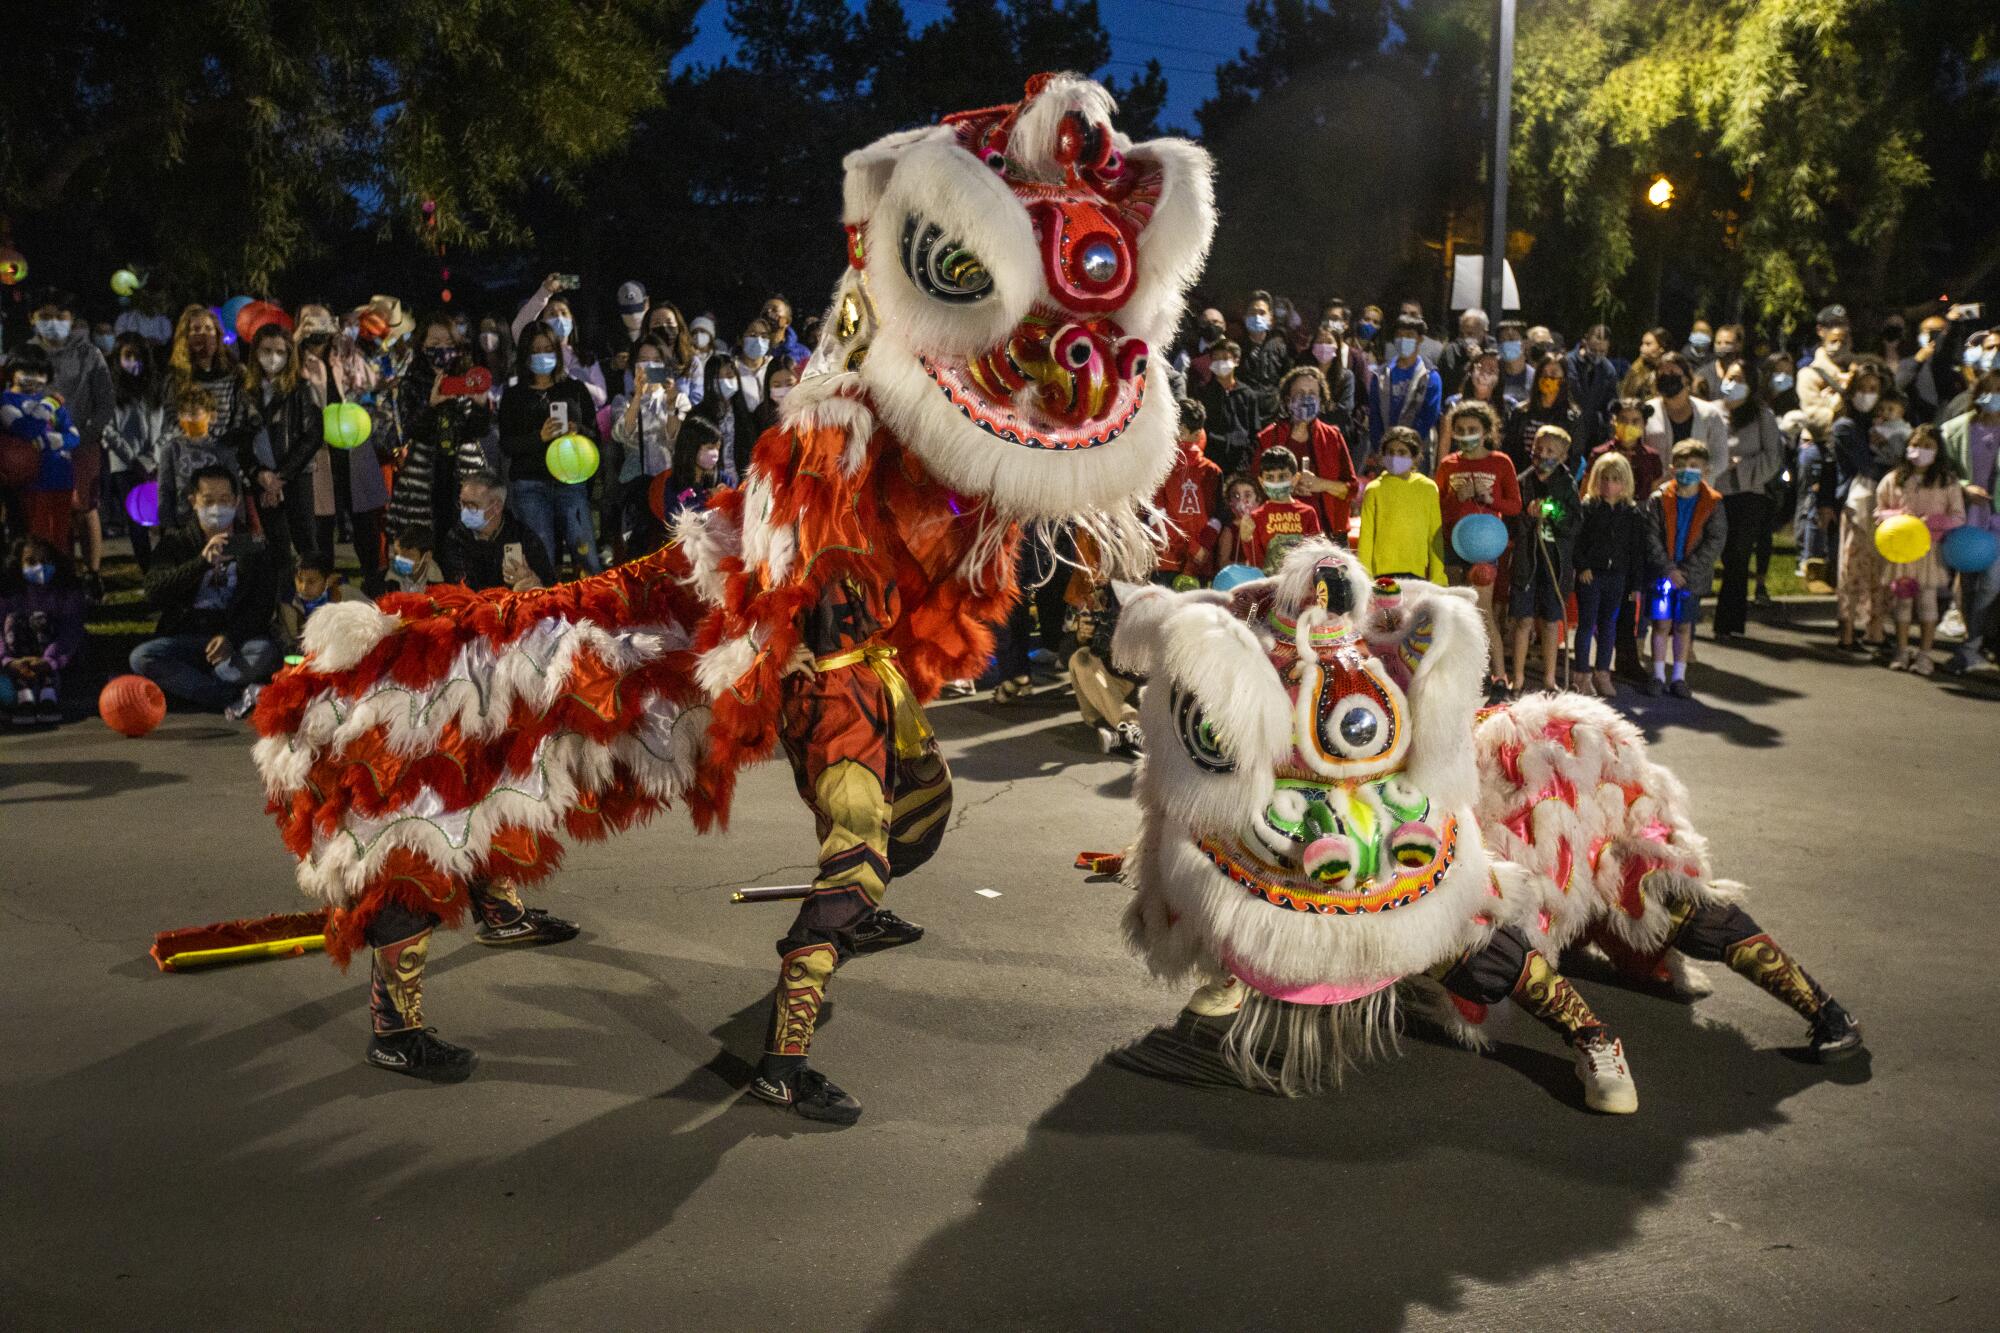 The Qing Wei Lion and Dragon Dance Cultural Troupe performs a lion dance in Ladera Ranch